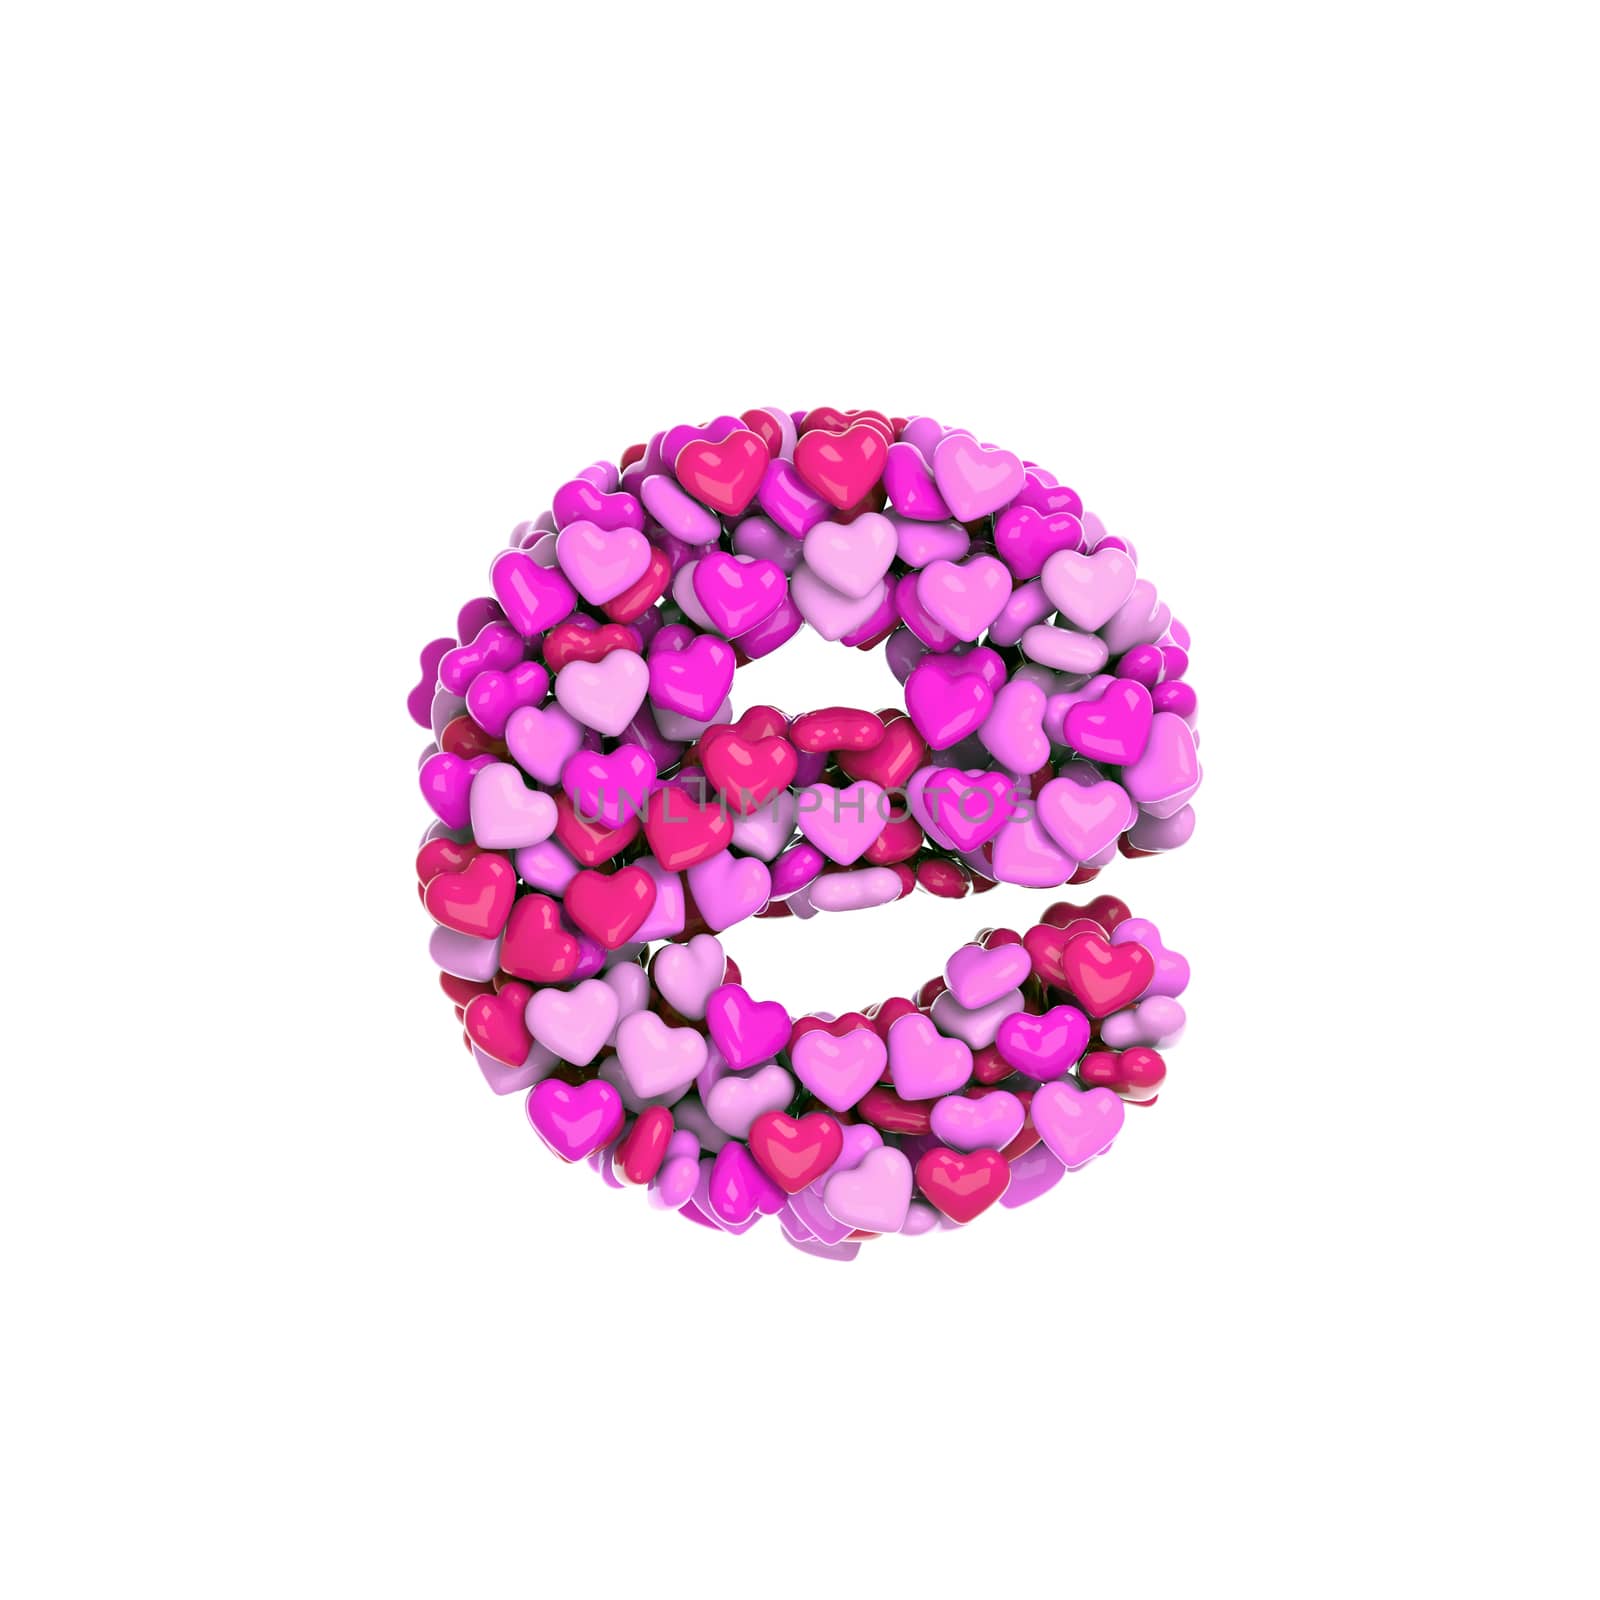 Valentine letter E - Lower-case 3d pink hearts font - Love, passion or wedding concept by chrisroll